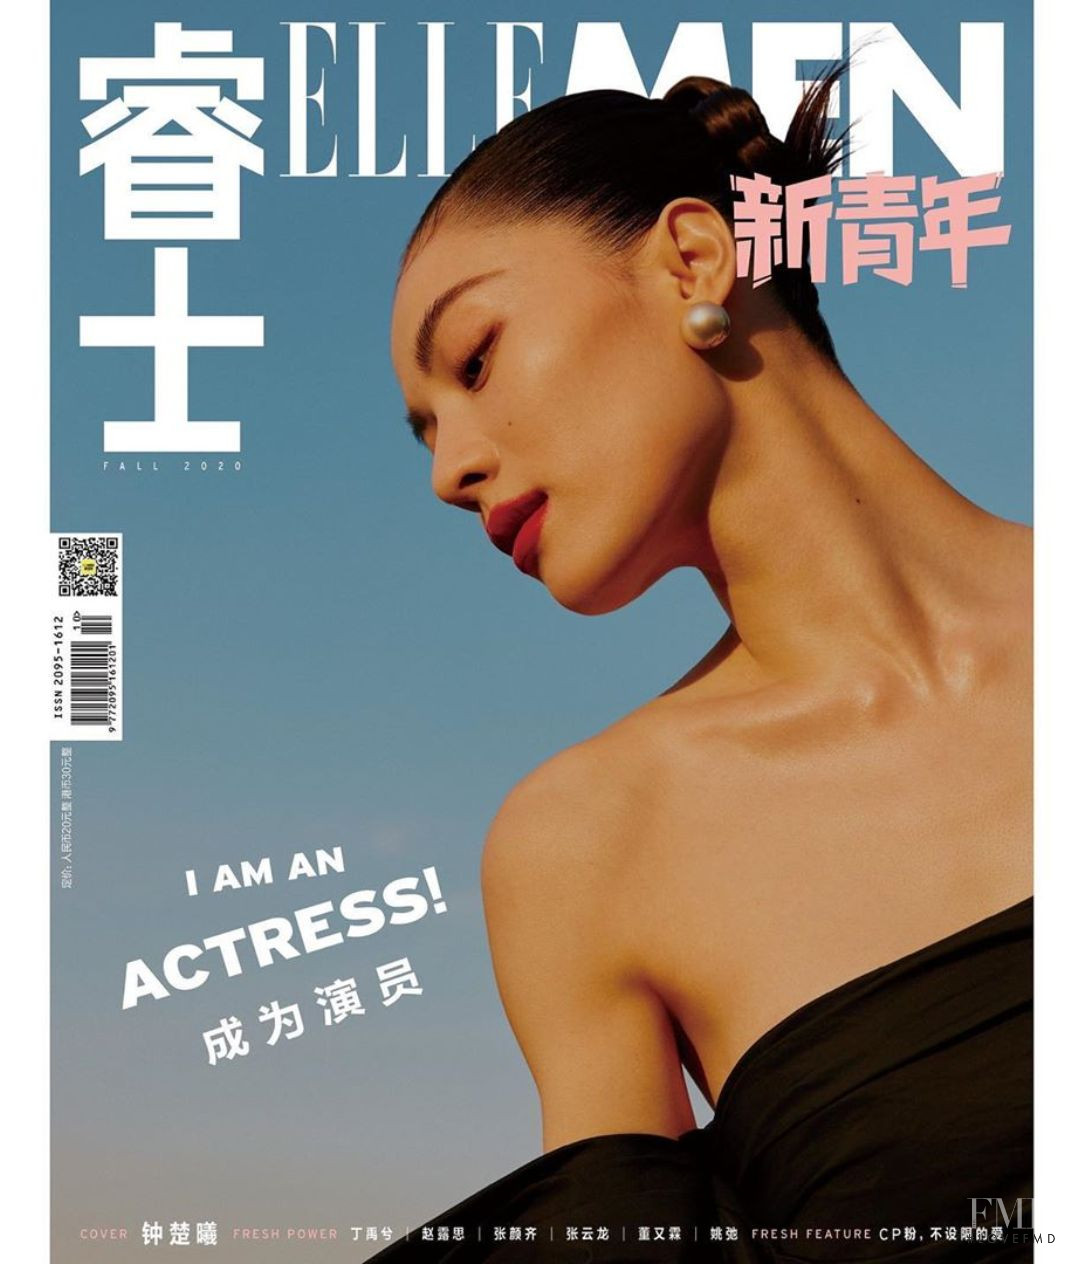 Cover of Elle Men China with Elane Zhong, July 2020 (ID:56760 ...